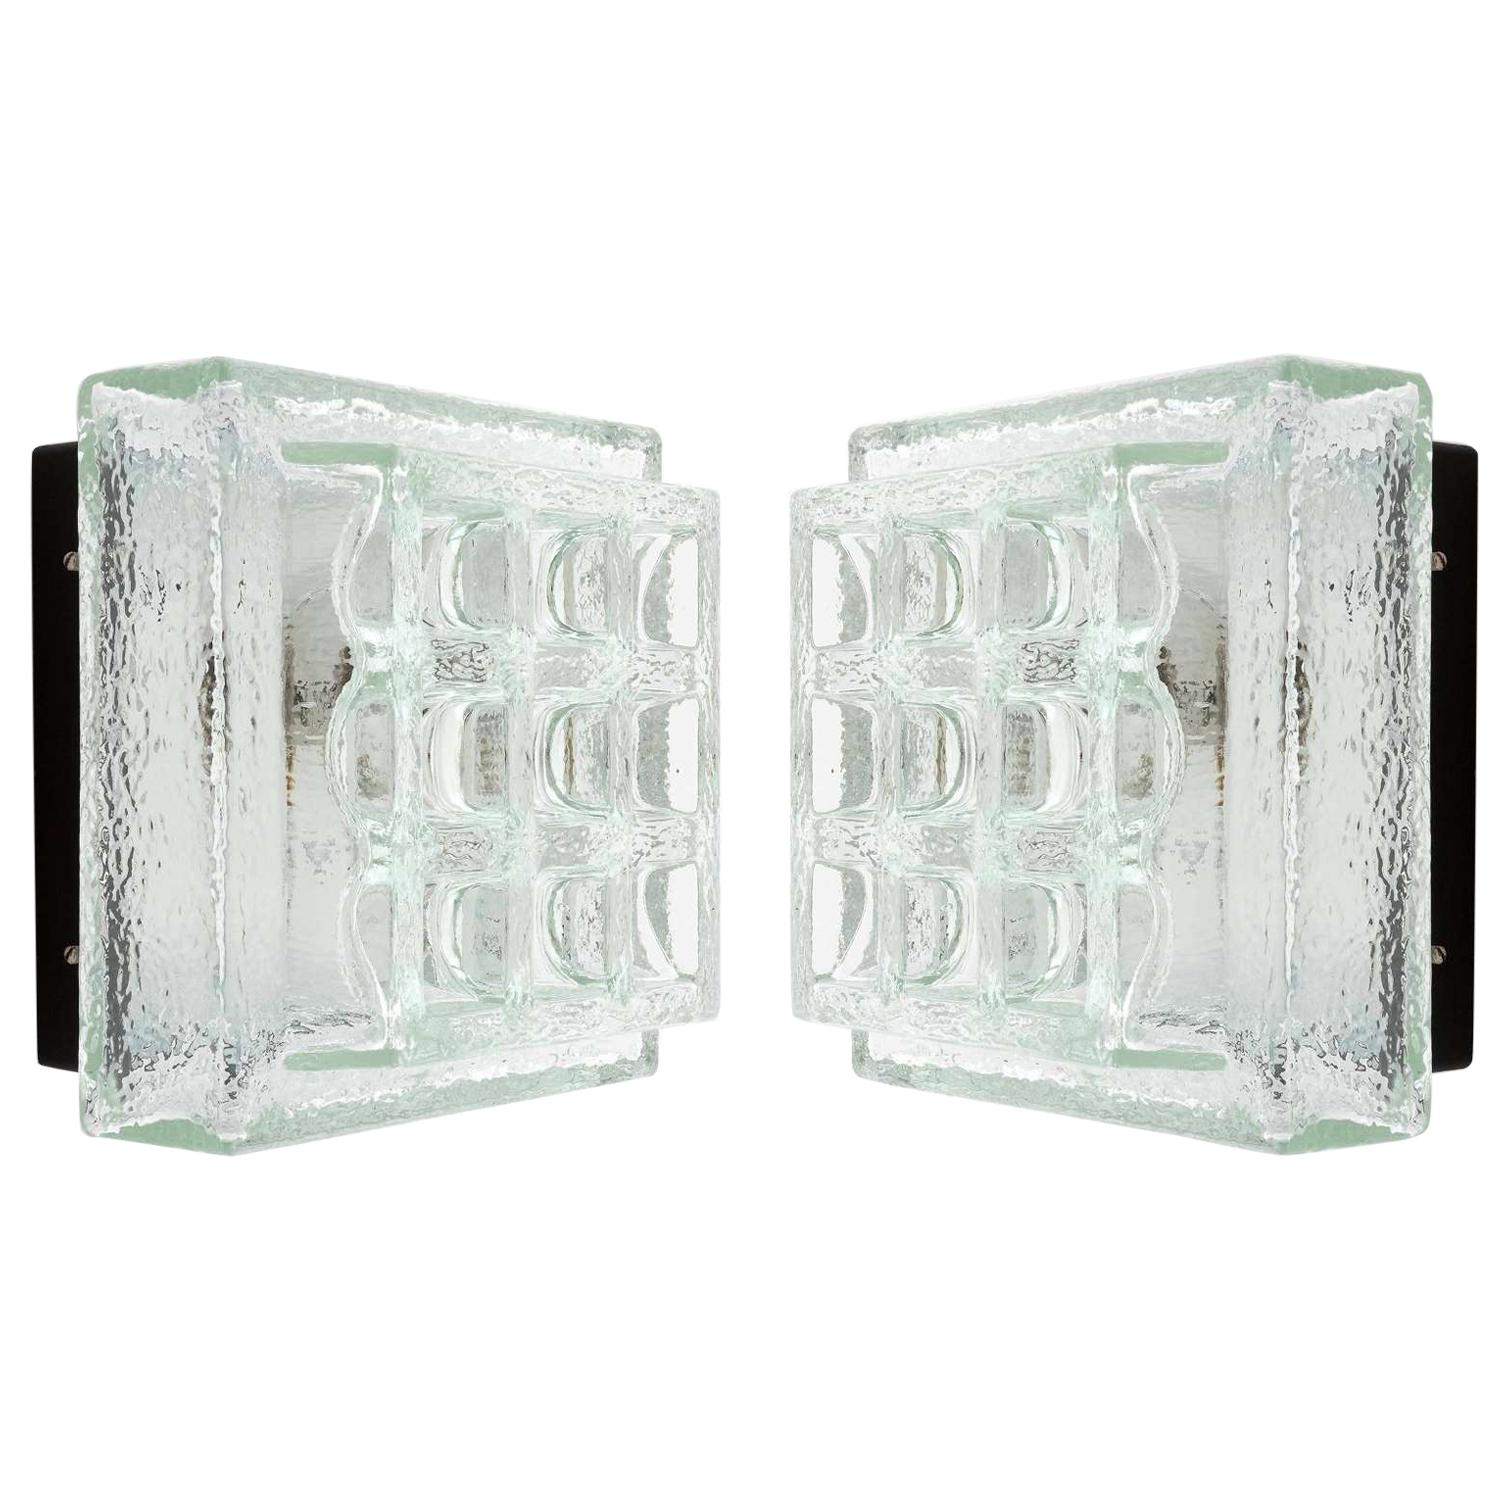 A pair of square modernist flush mount light fixtures or sconces by Glashütte Limburg, manufactured in midcentury, circa 1970 (late 1960s or early 1970s). A black lacquered metal backplate holds a thick geometric textured ice glass. 
The fixtures